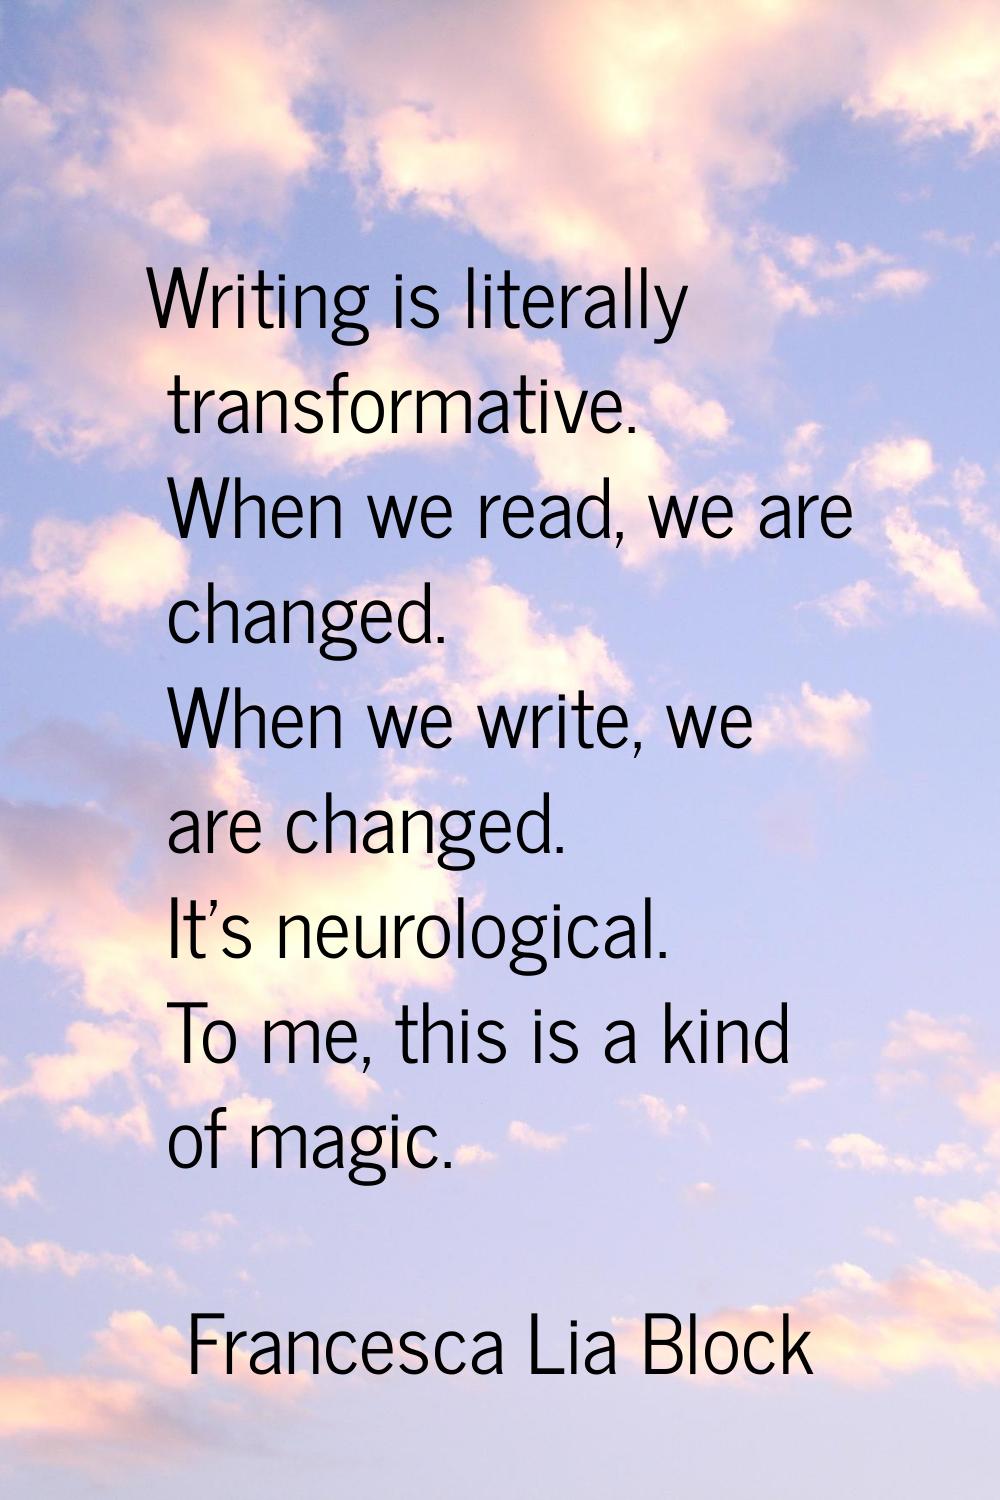 Writing is literally transformative. When we read, we are changed. When we write, we are changed. I